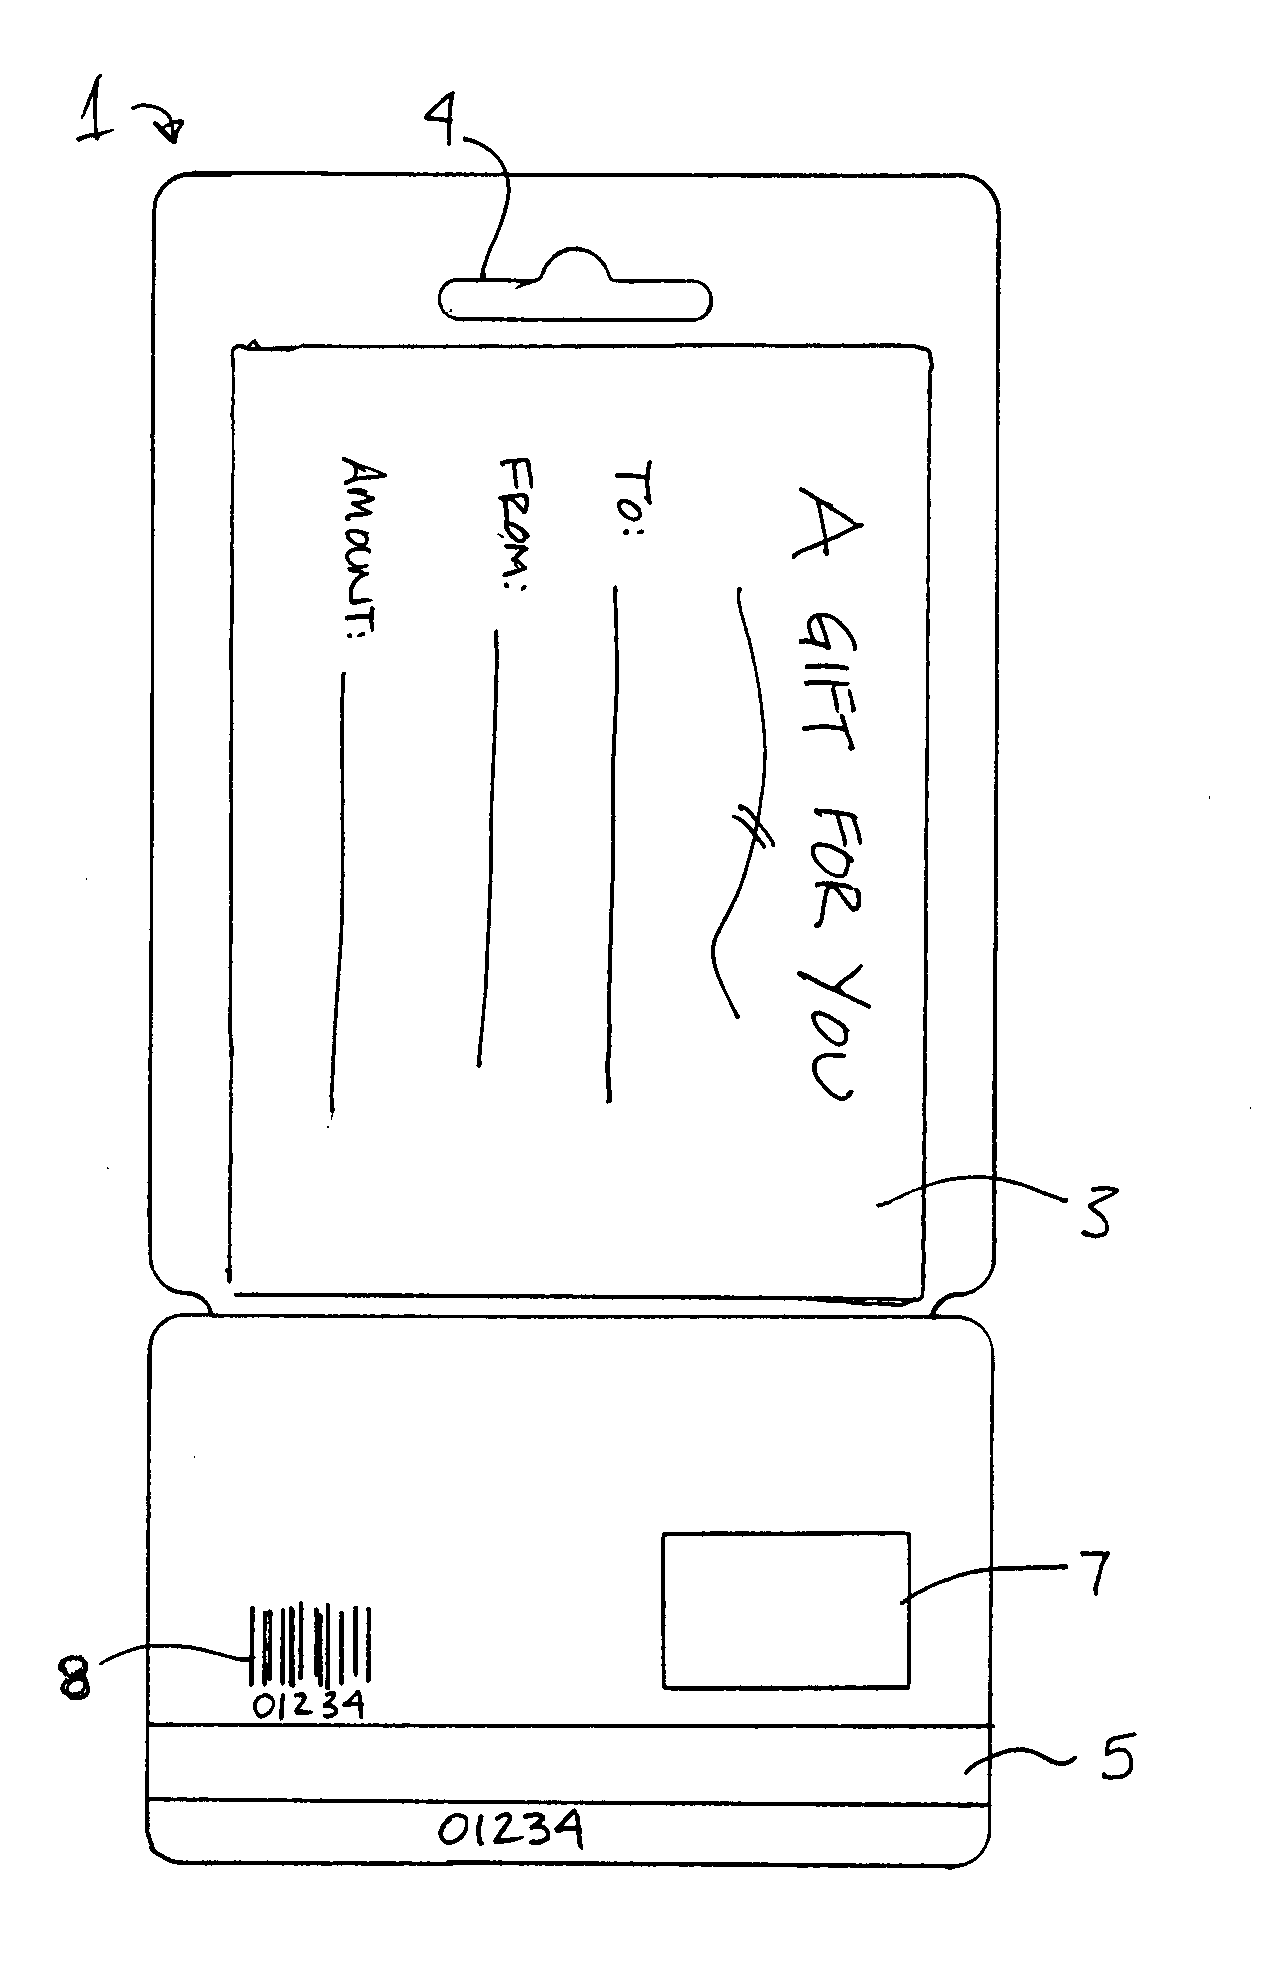 Transaction card and envelope assembly